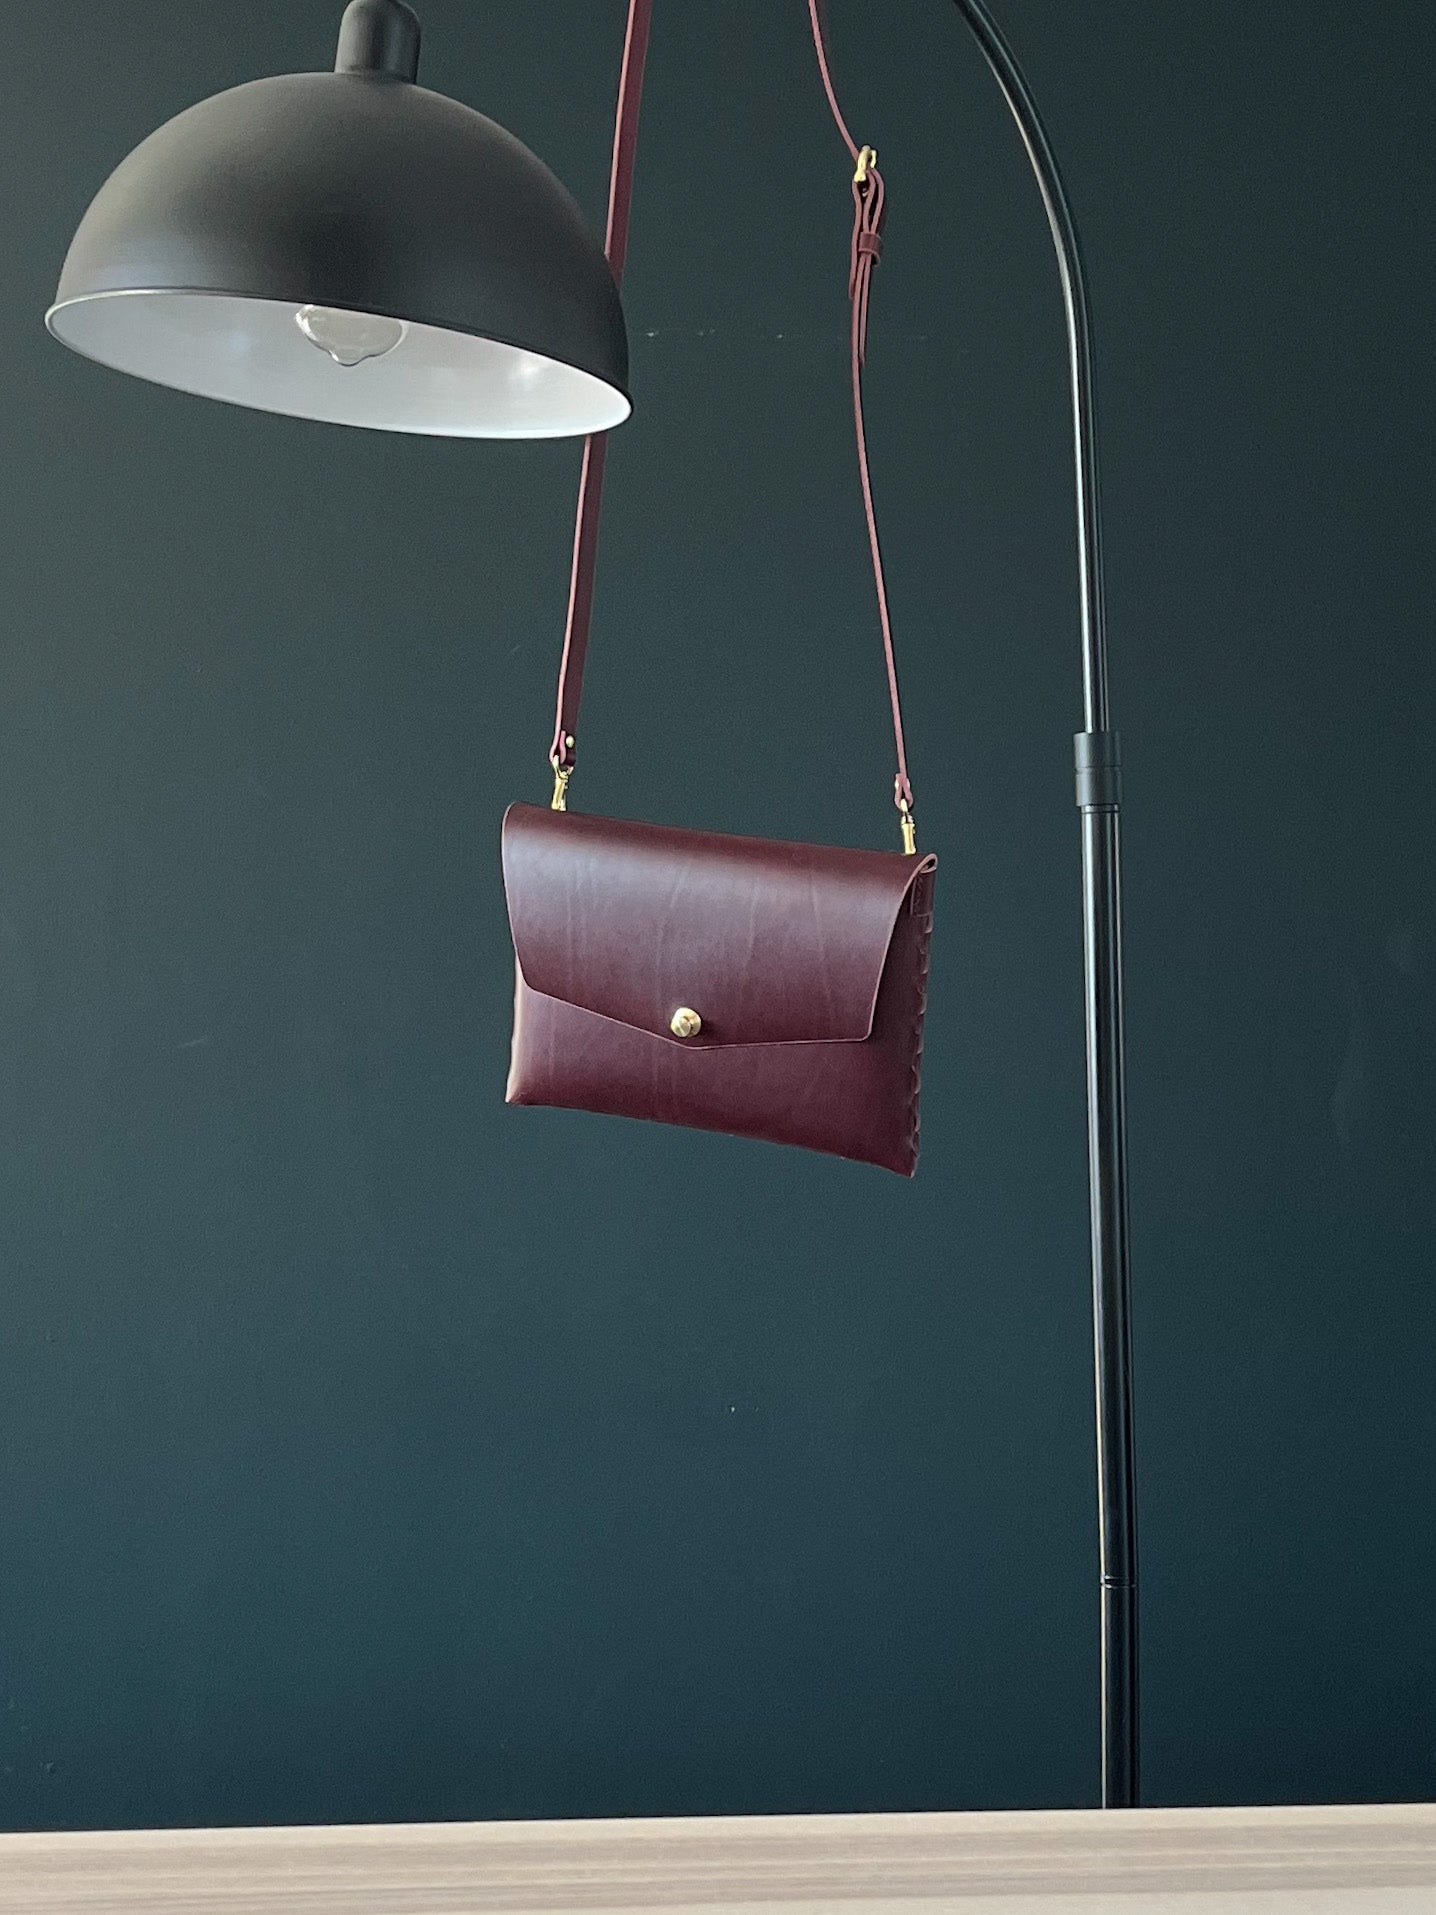 modjūl’s leather mini bag deluxe bag in olive, hanging on a lamp. A larger take on the classic mini bag, a rectangular-shaped bag with long detachable straps, handcrafted in Canada using quality Italian leather and brass hardware.